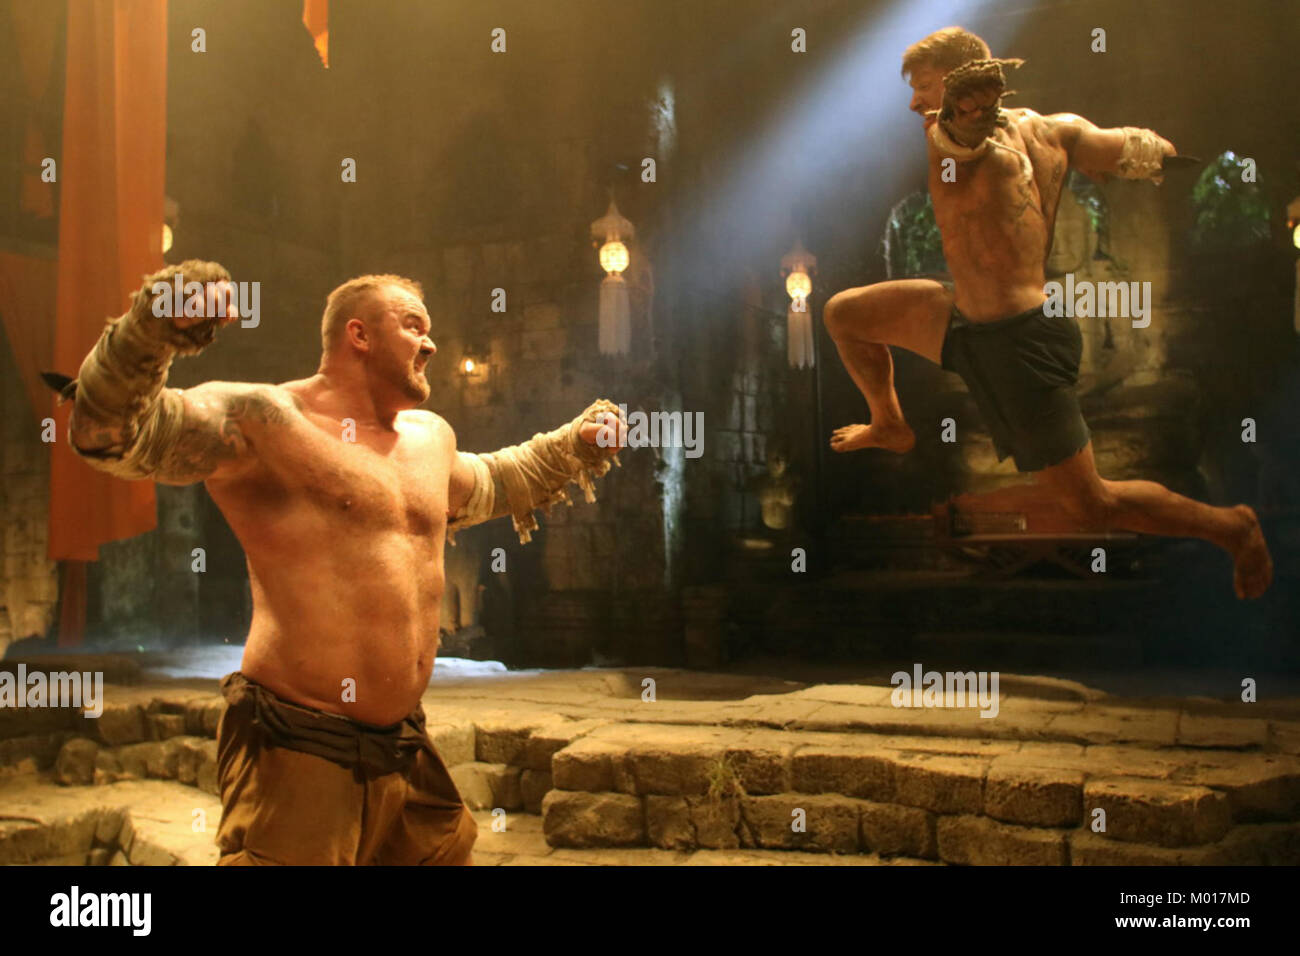 Kickboxer Retaliation Is An Upcoming American Martial Arts Film Directed M017MD 